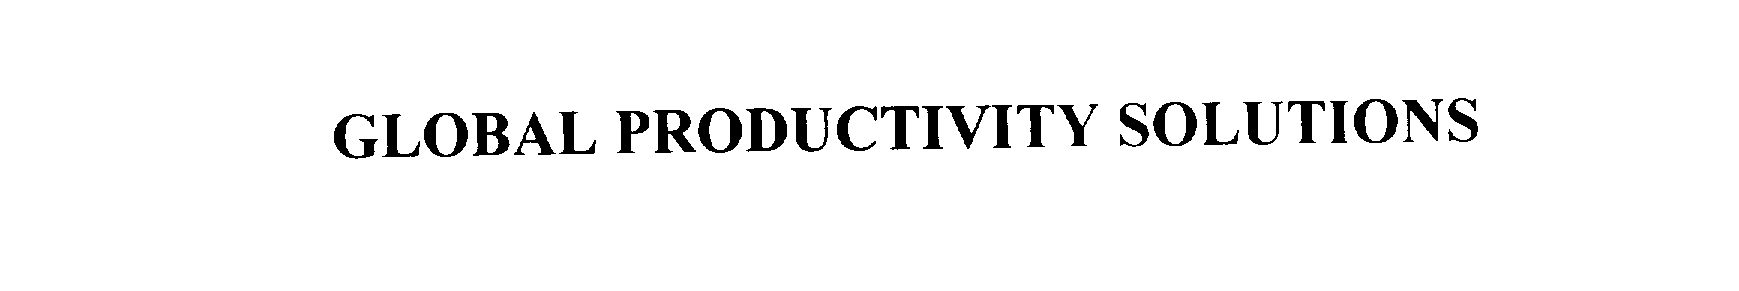  GLOBAL PRODUCTIVITY SOLUTIONS